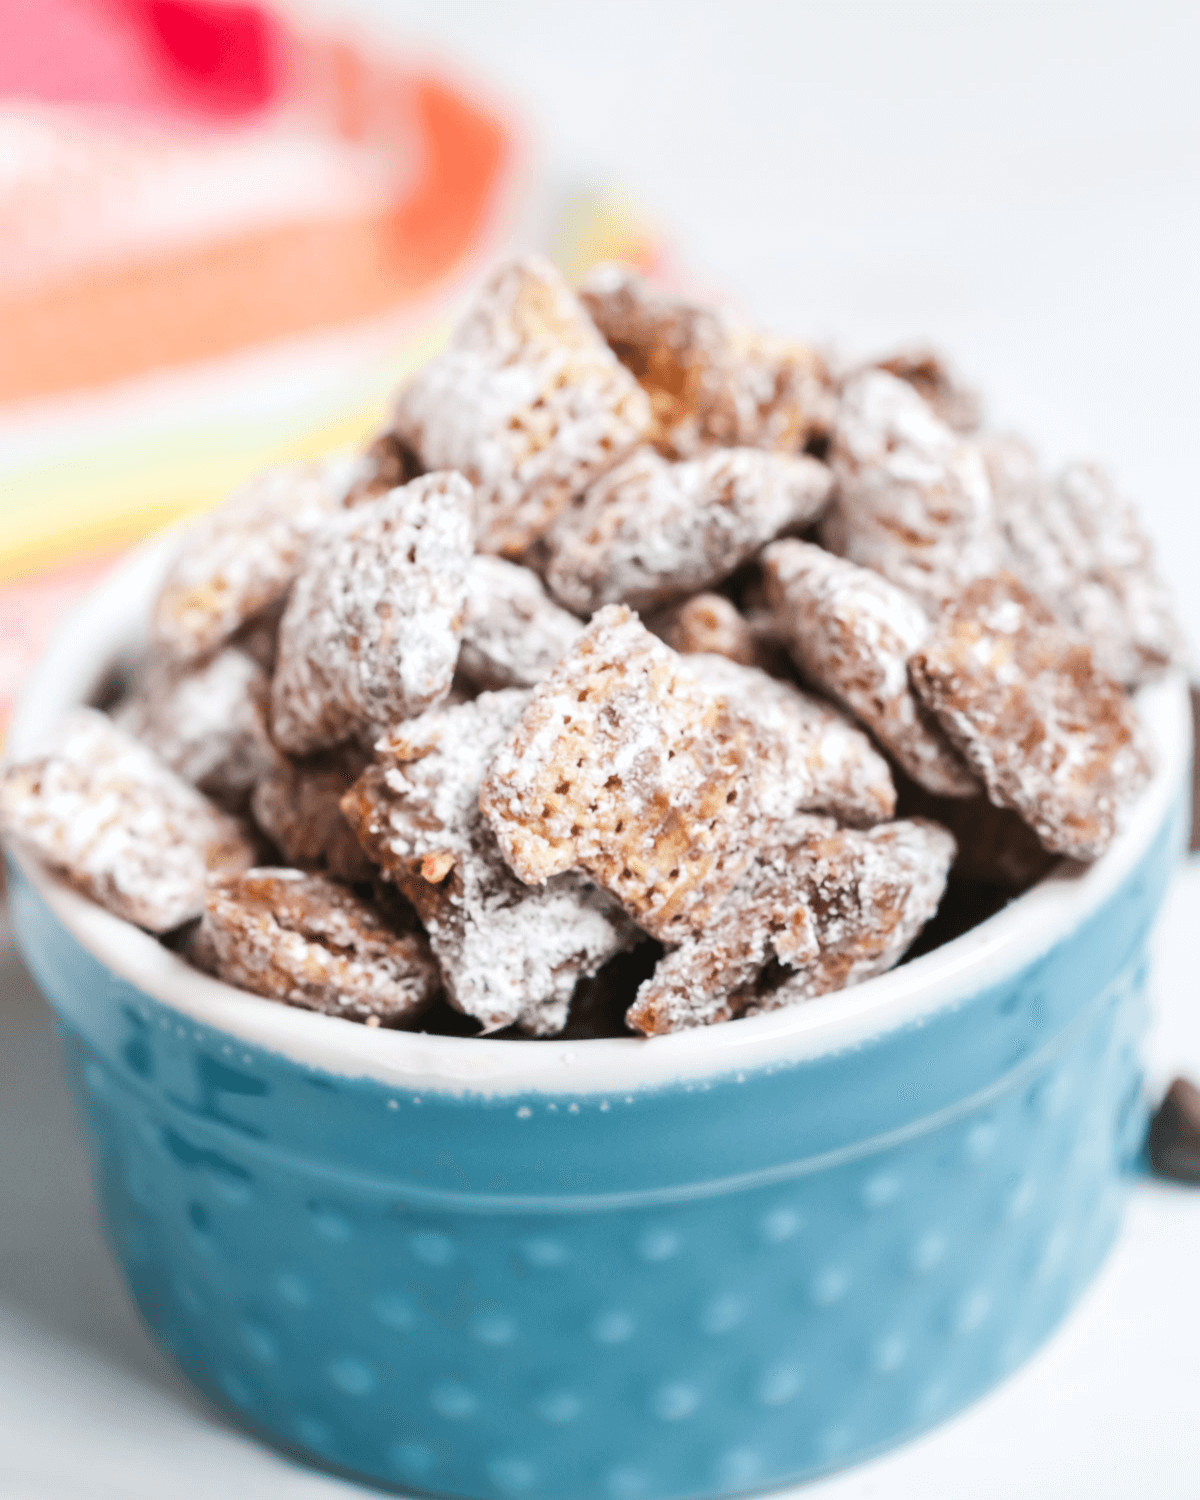 A tight shot of the chex mix muddy buddies.